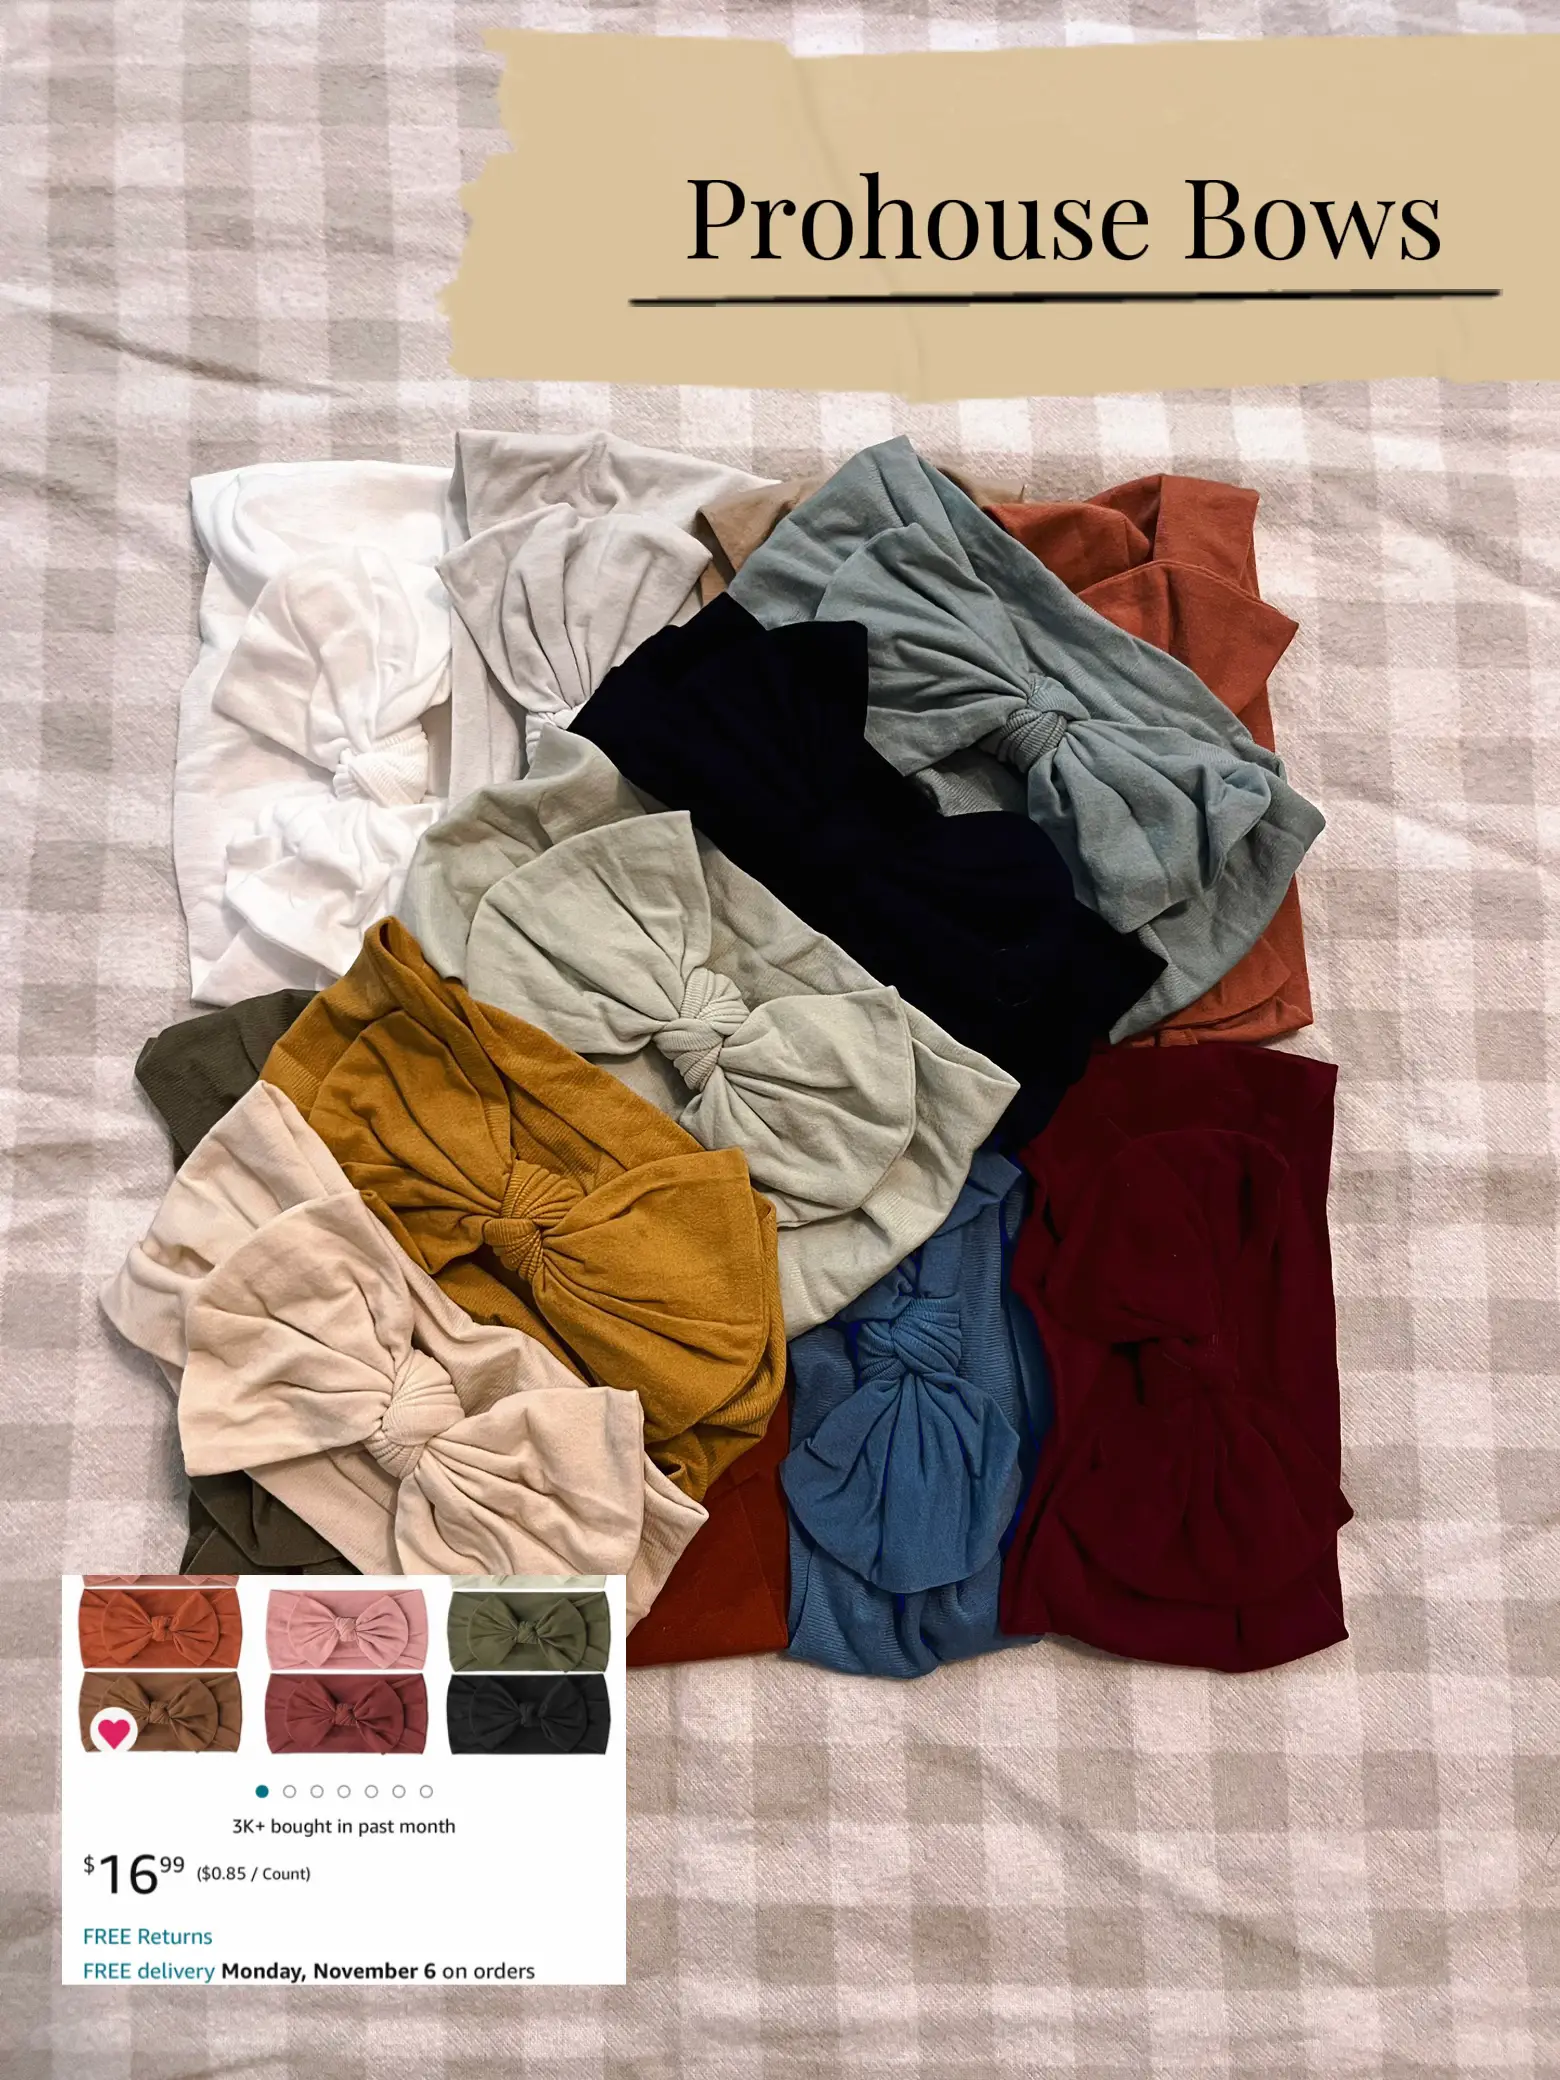  A collage of different colored shirts with a price of $16.